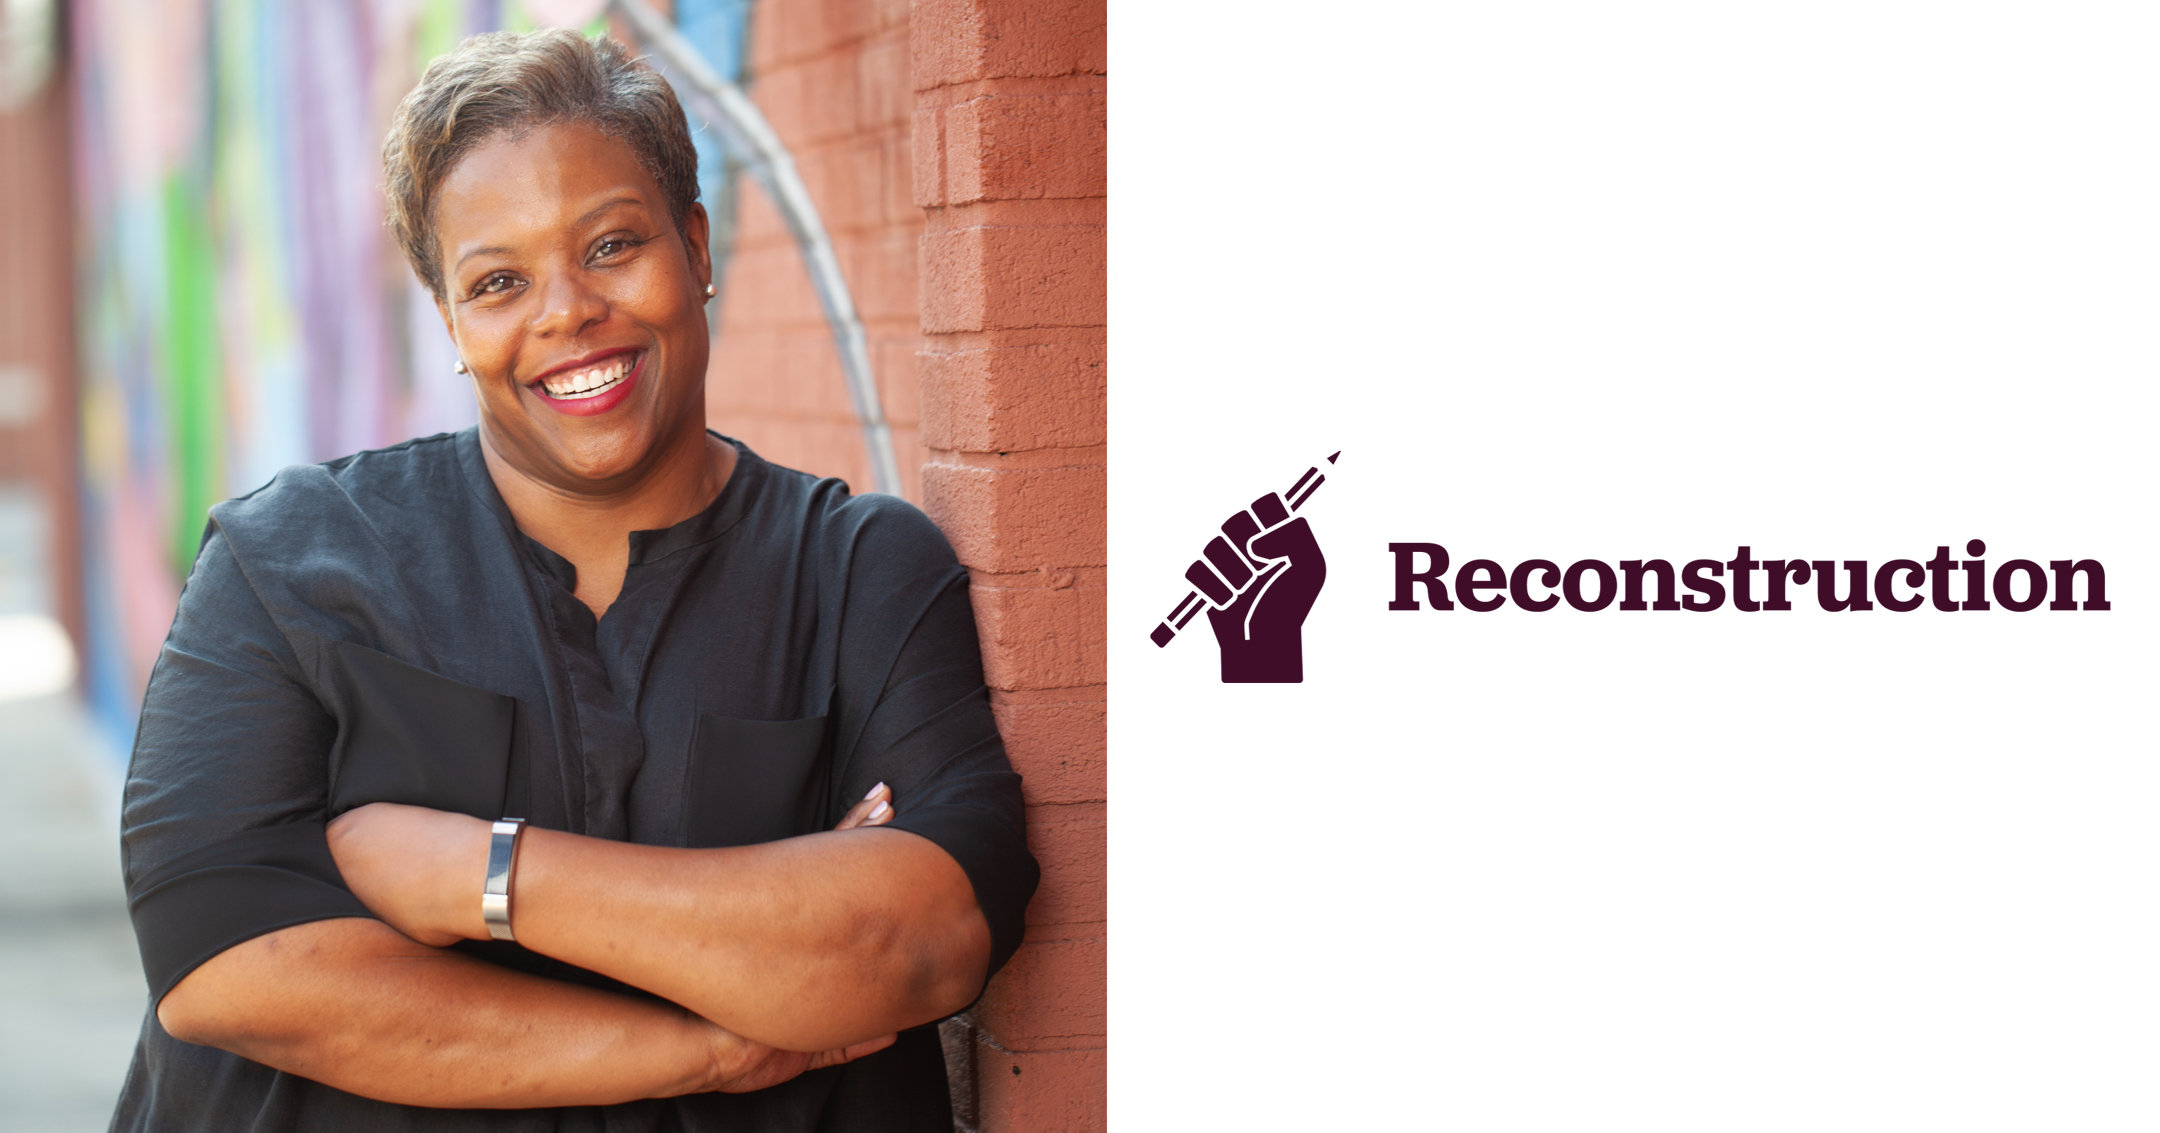 Kaya Henderson photo on the left, logo for her organization Reconstruction on the right